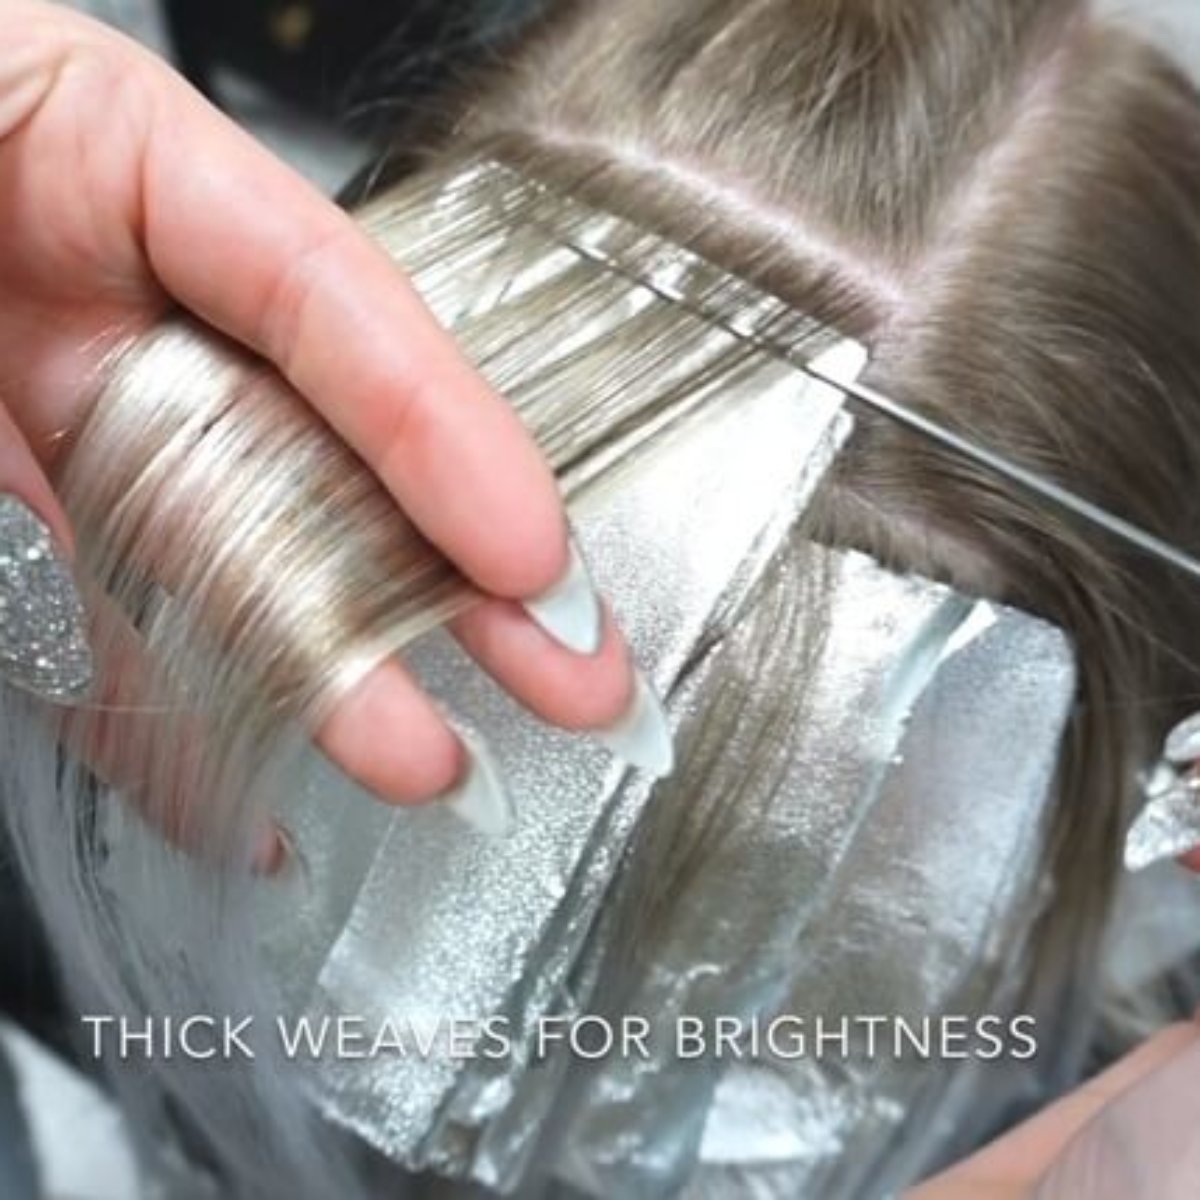 Hair being foiled with hair color